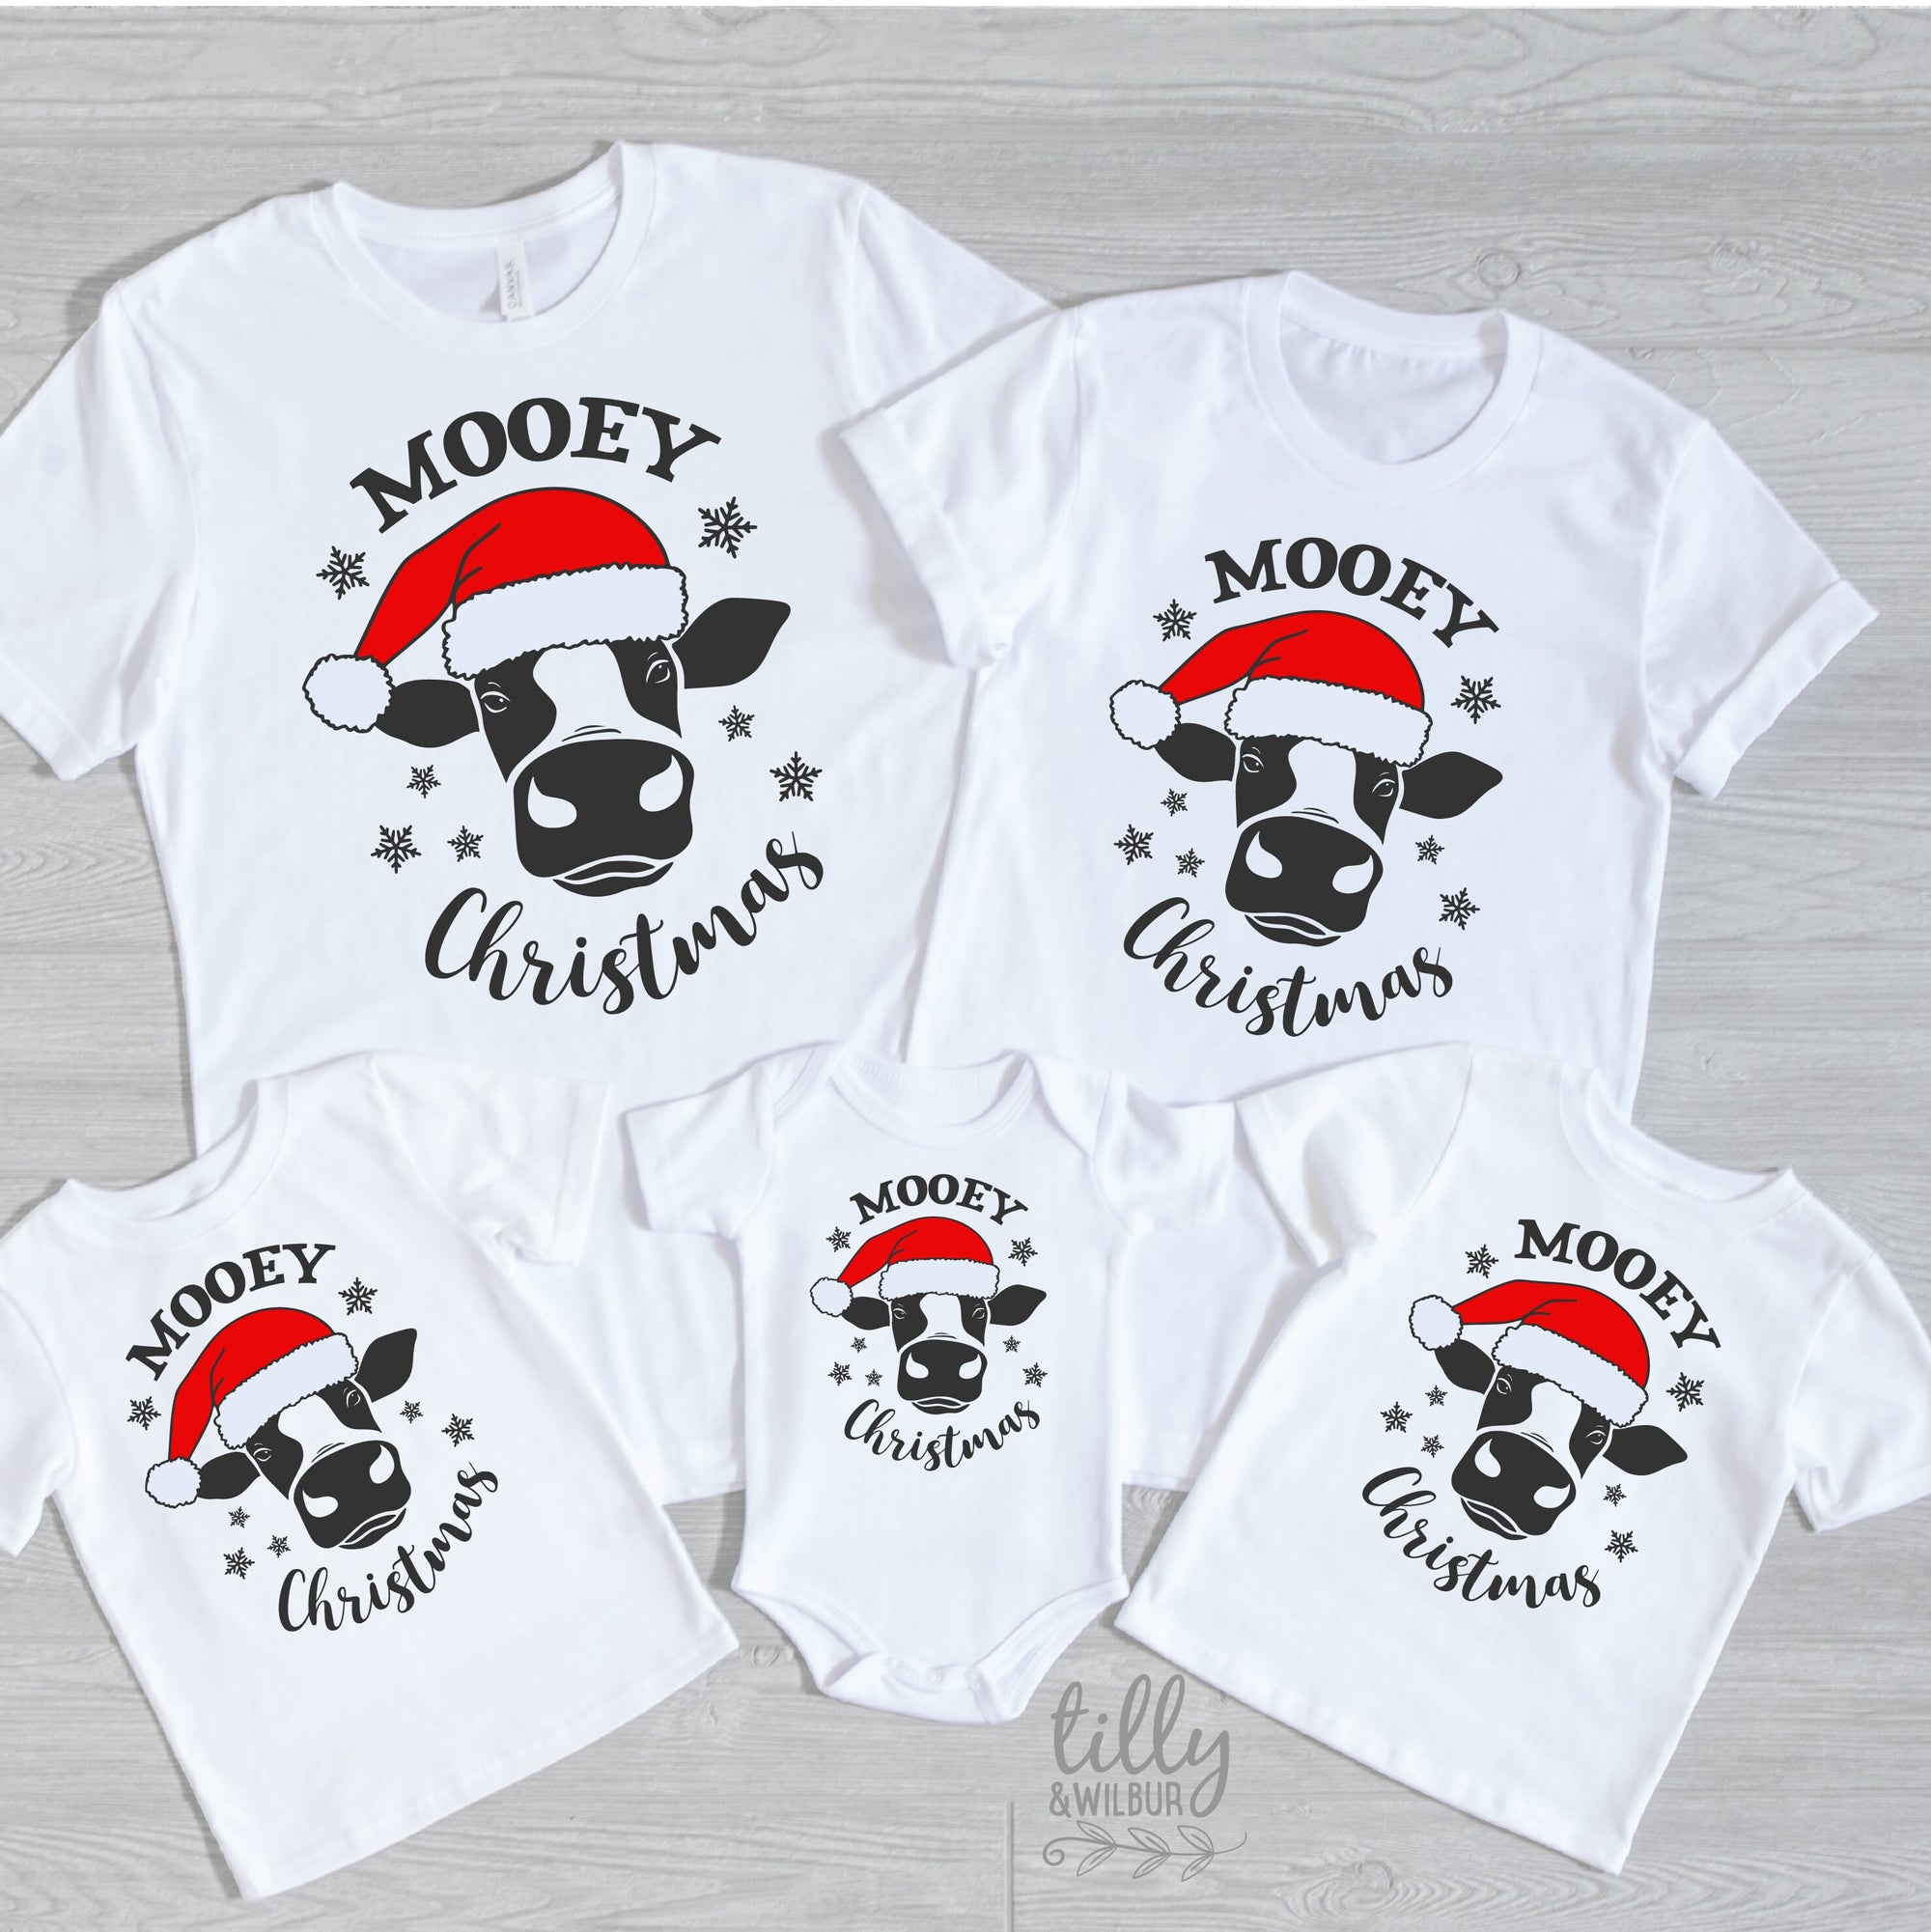 Matching Family Christmas T-Shirts, Mooey Christmas T-Shirt, Funny Christmas Tee, Family Farm Pyjamas, Christmas Farm T-Shirt, Christmas Cow